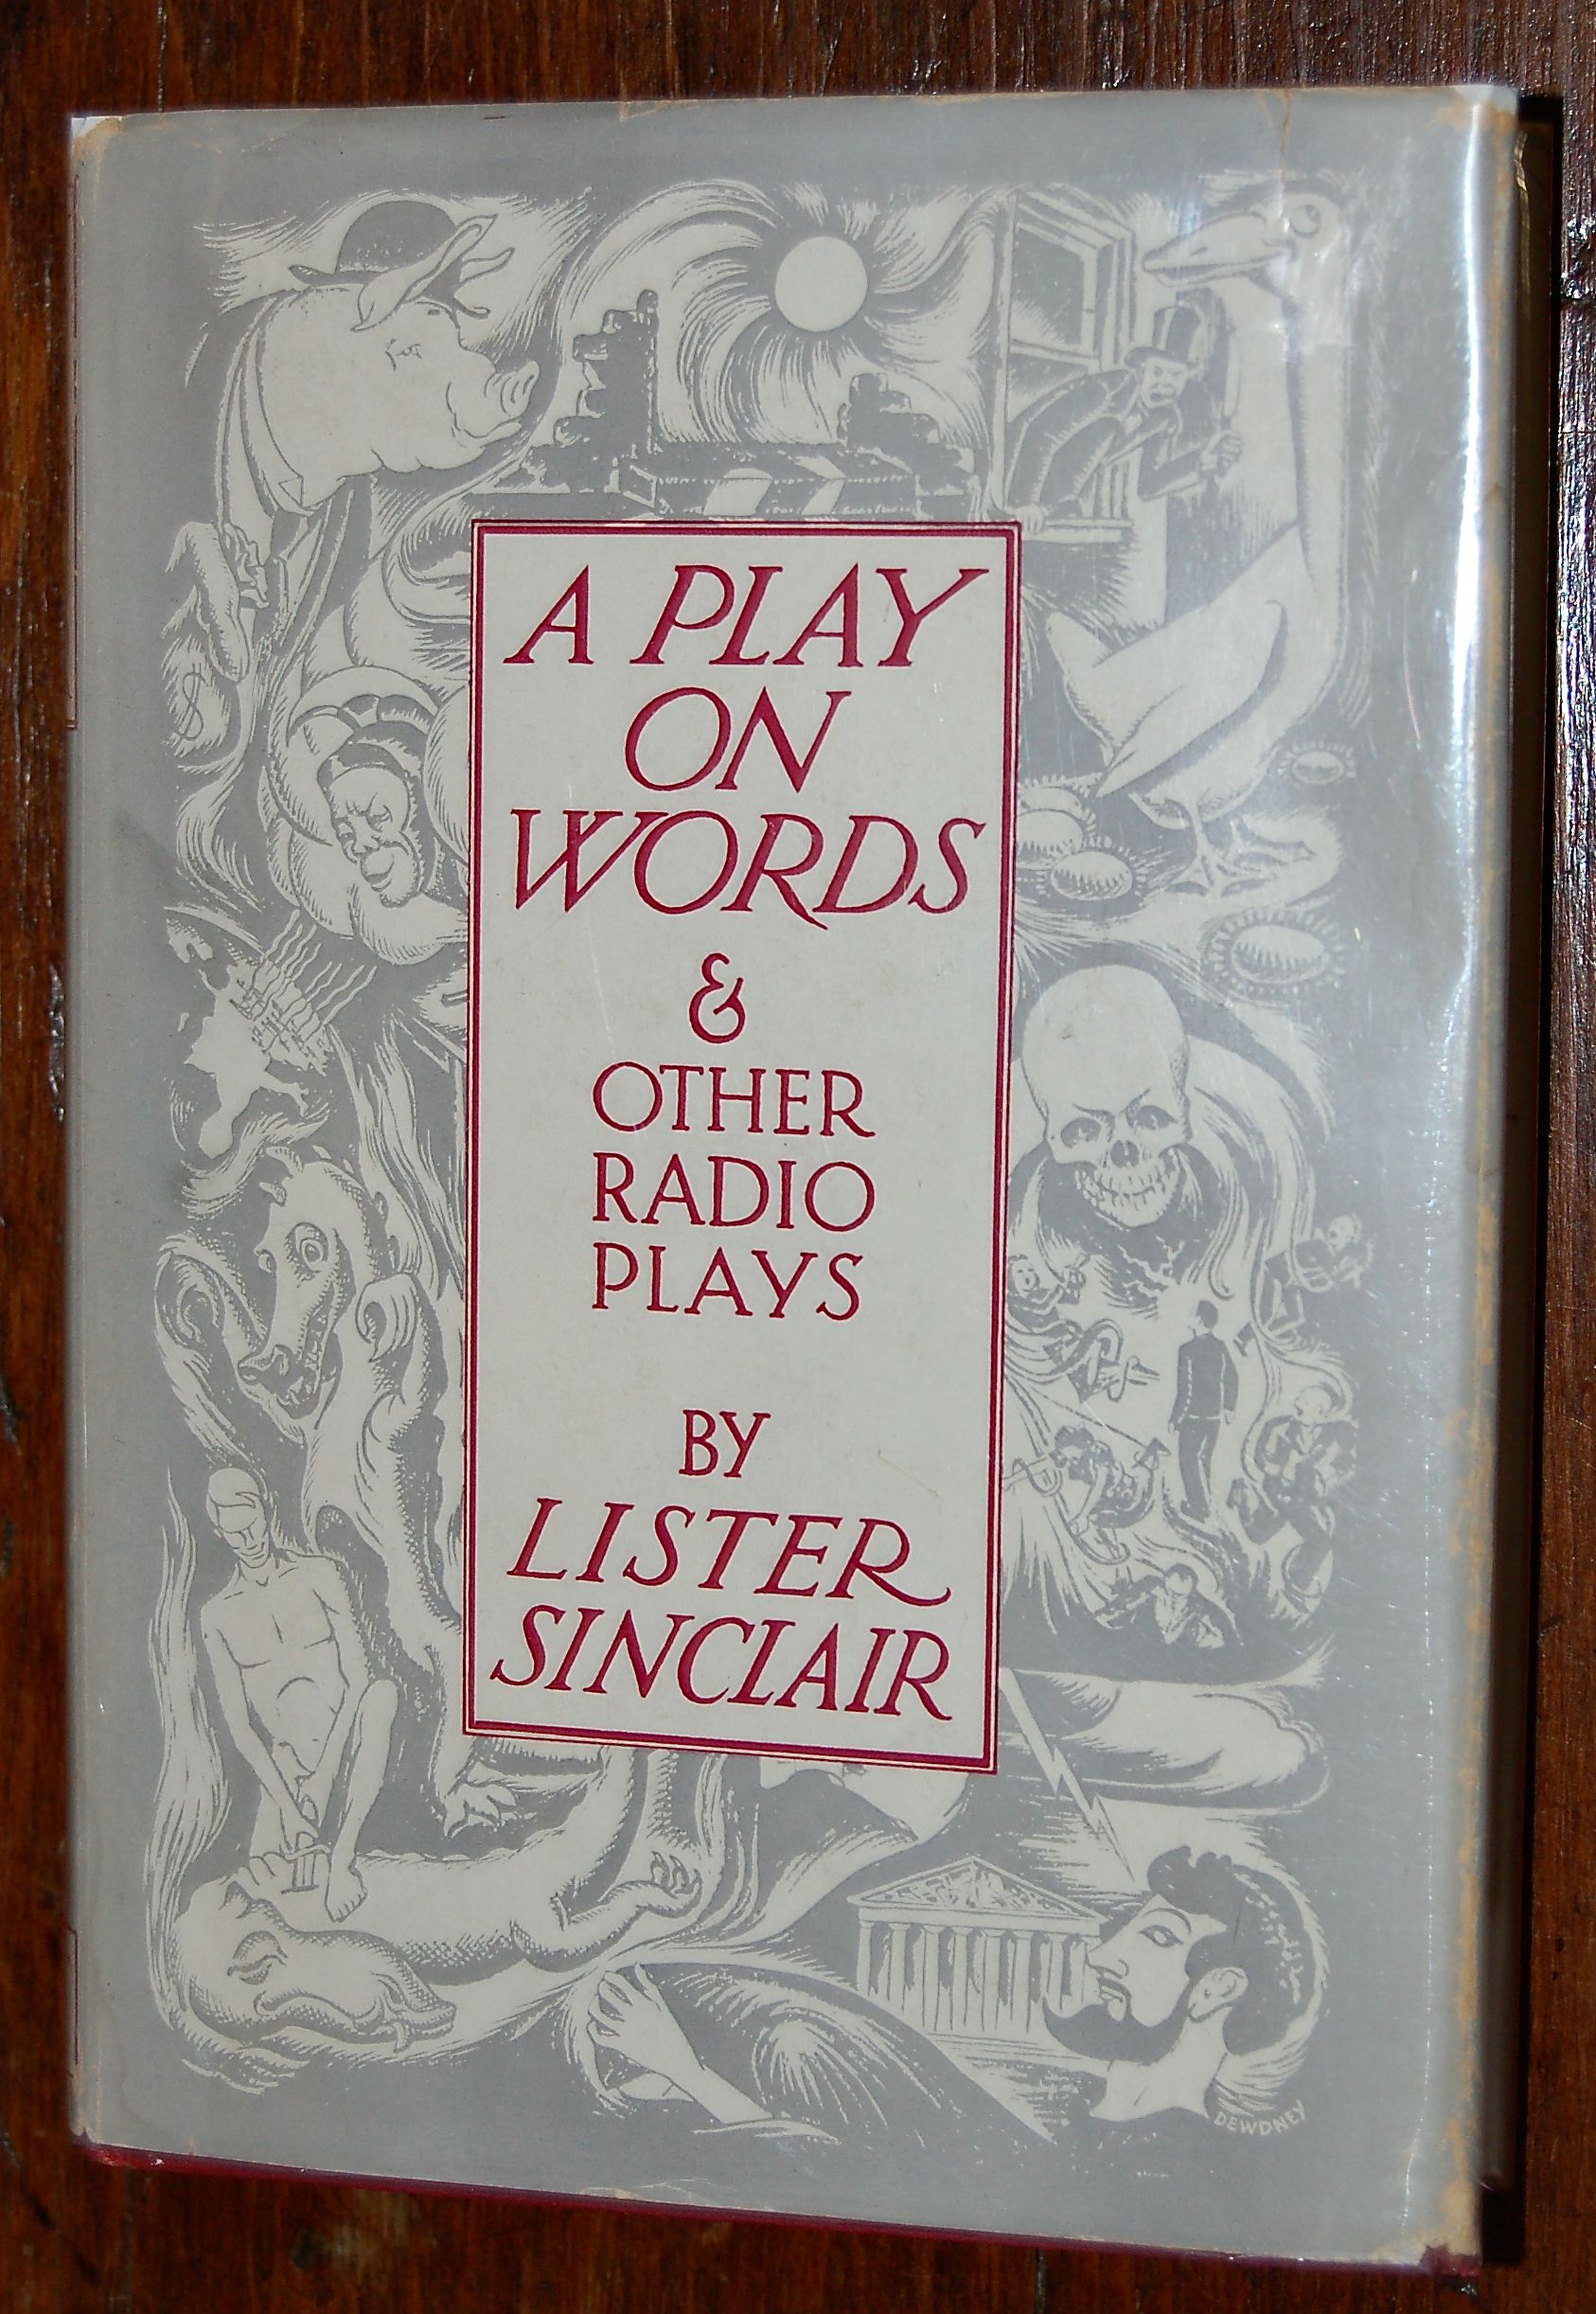 A Play on Words & Other Radio Plays